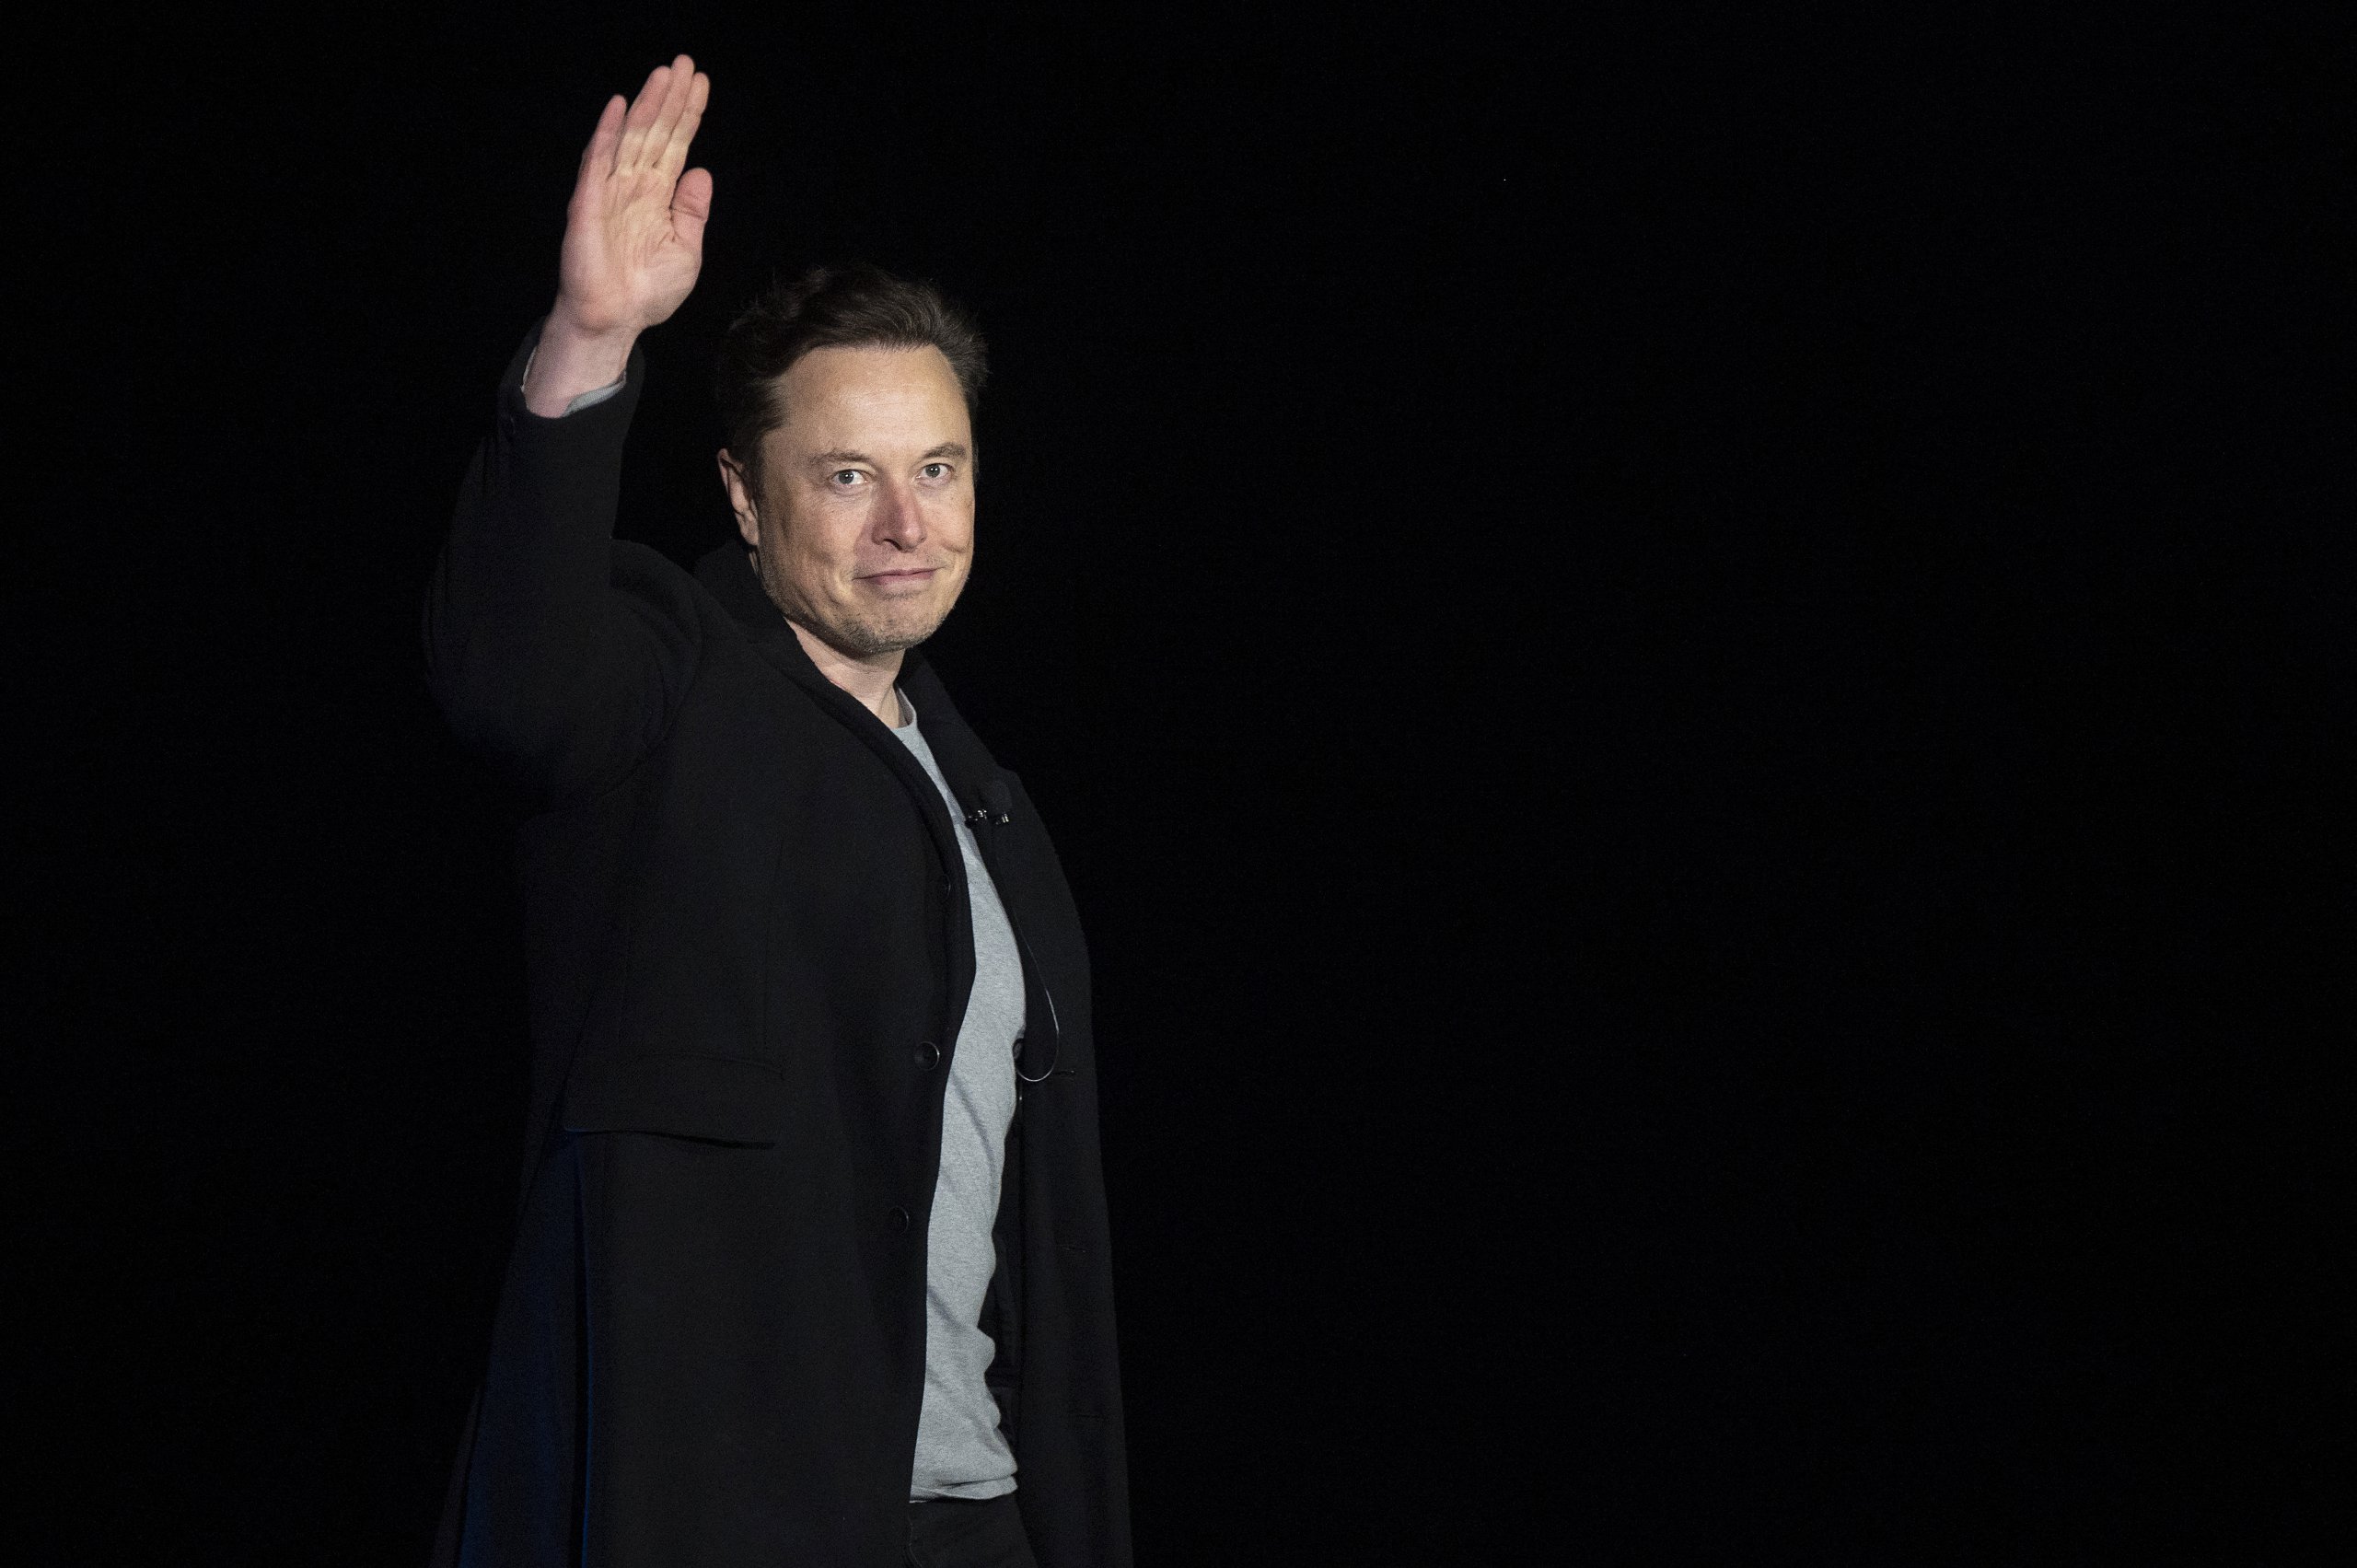 Elon Musk now owns Twitter. How will the social media platform be hereon?